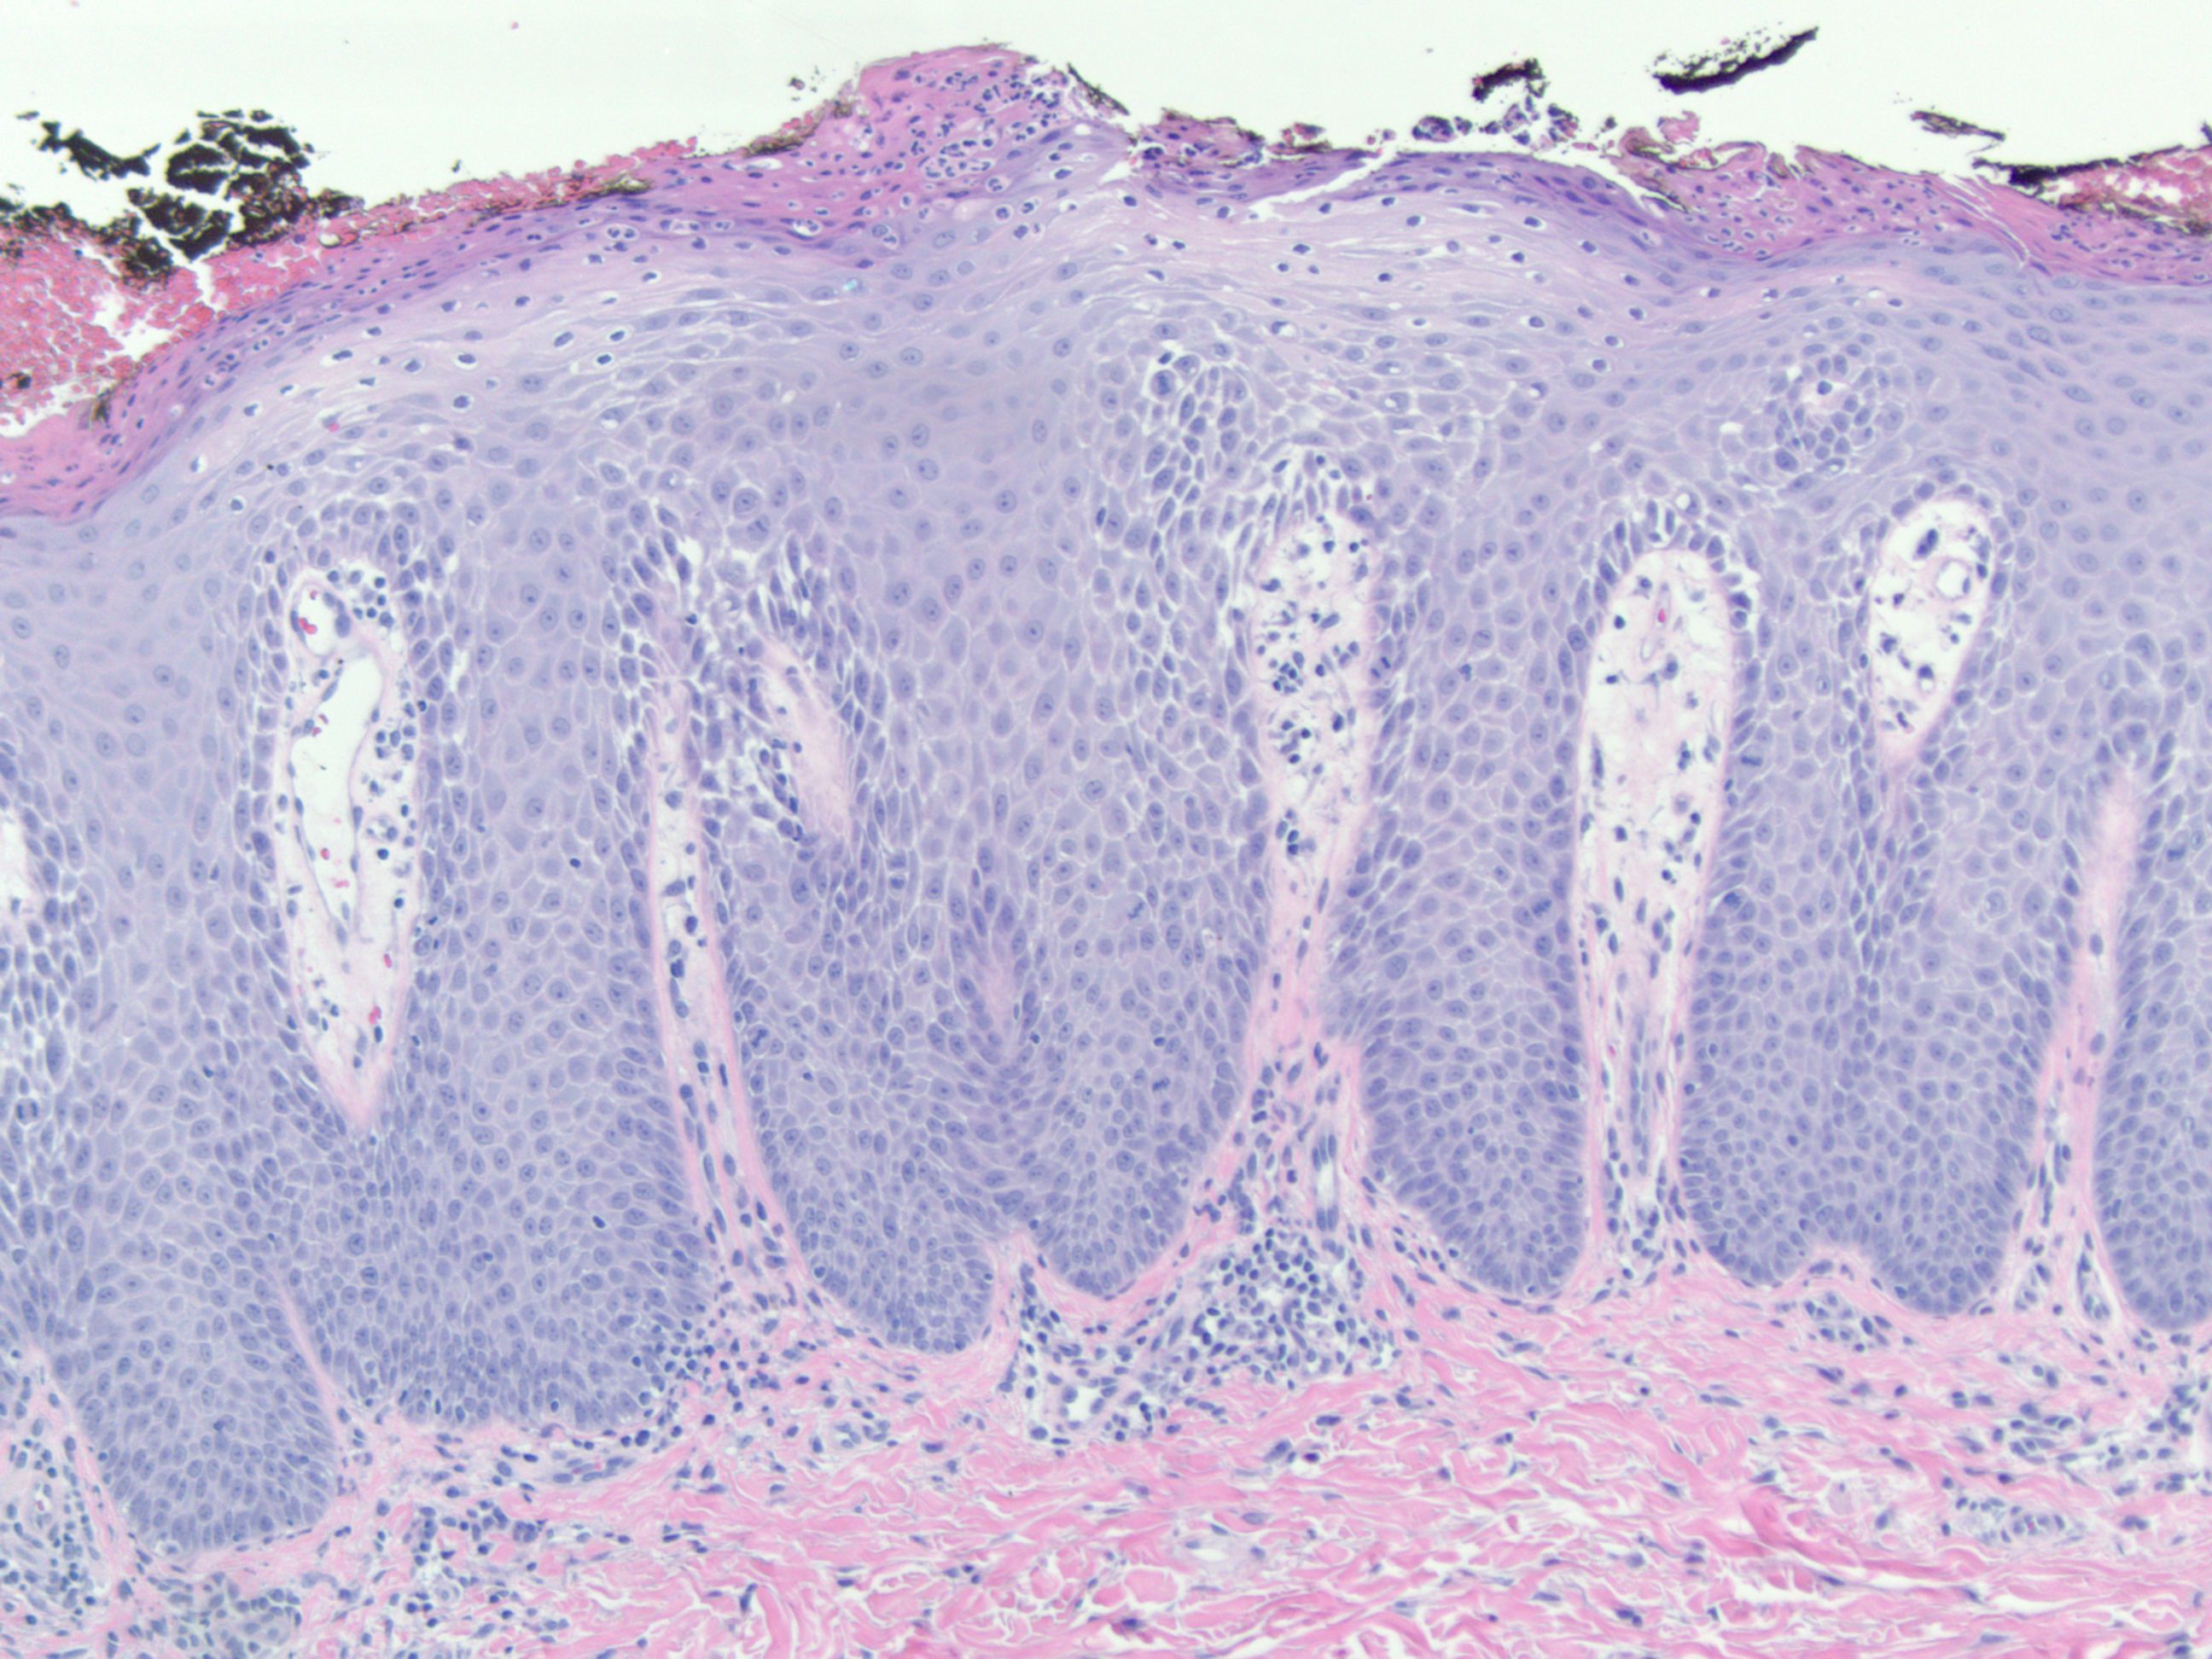 Biopsy of psoriasis showing a epidermal hyperplasia (source)